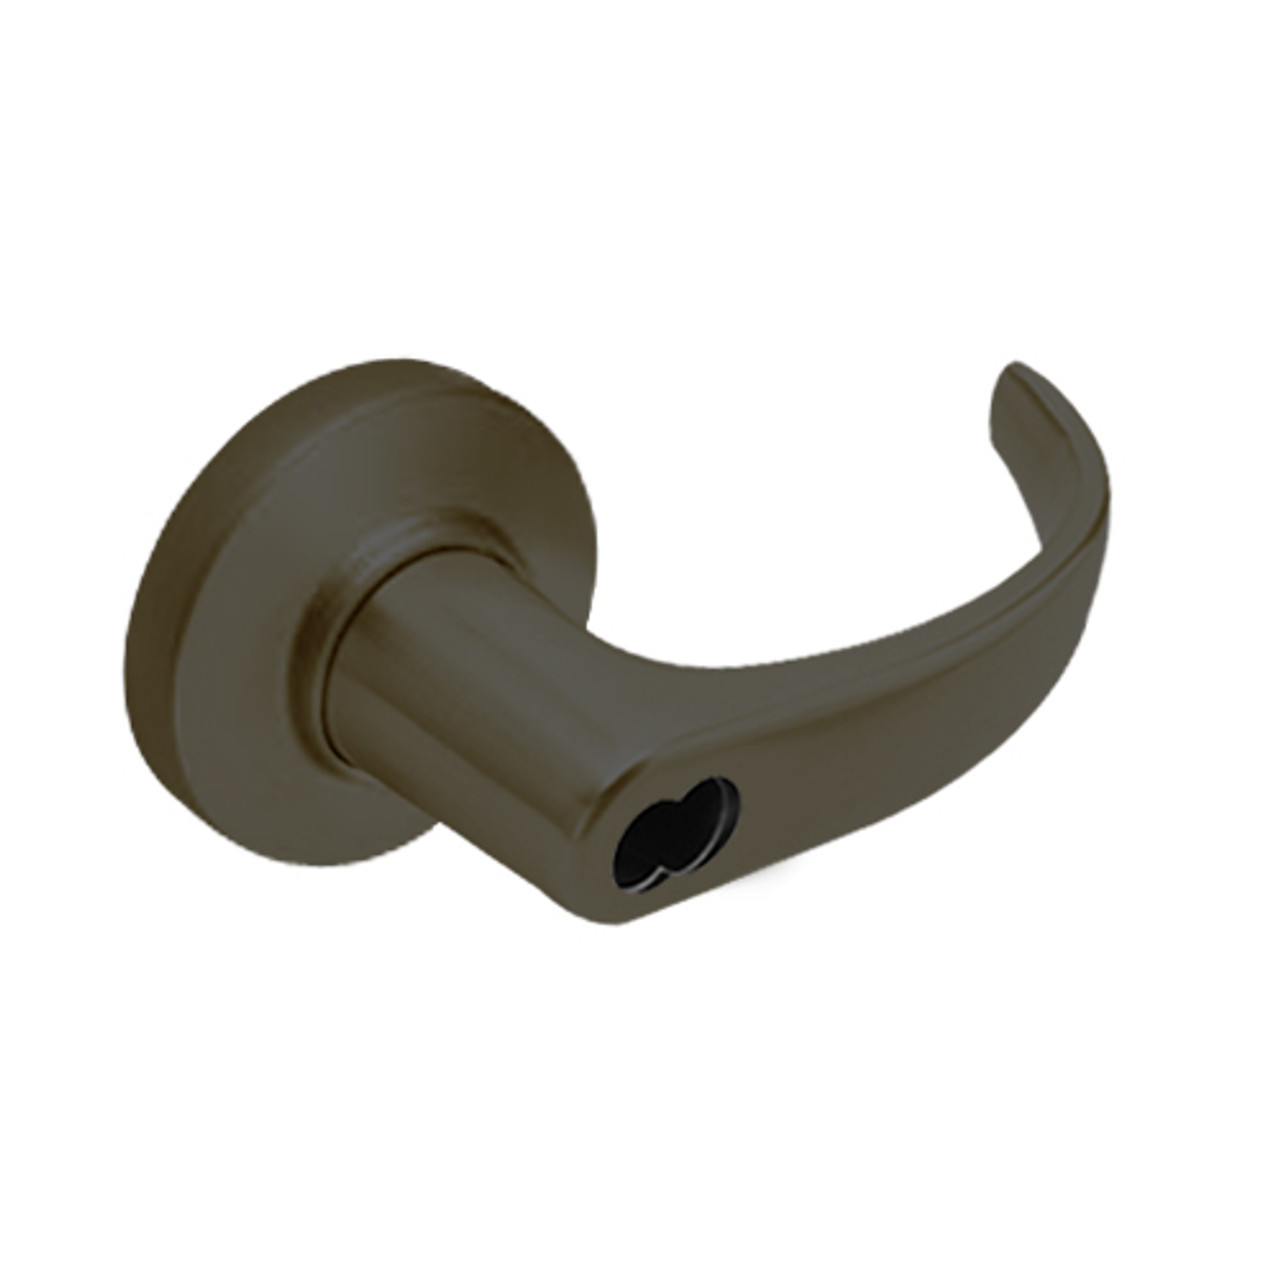 9K37YR14CS3613 Best 9K Series Special Function Cylindrical Lever Locks with Curved with Return Lever Design Accept 7 Pin Best Core in Oil Rubbed Bronze